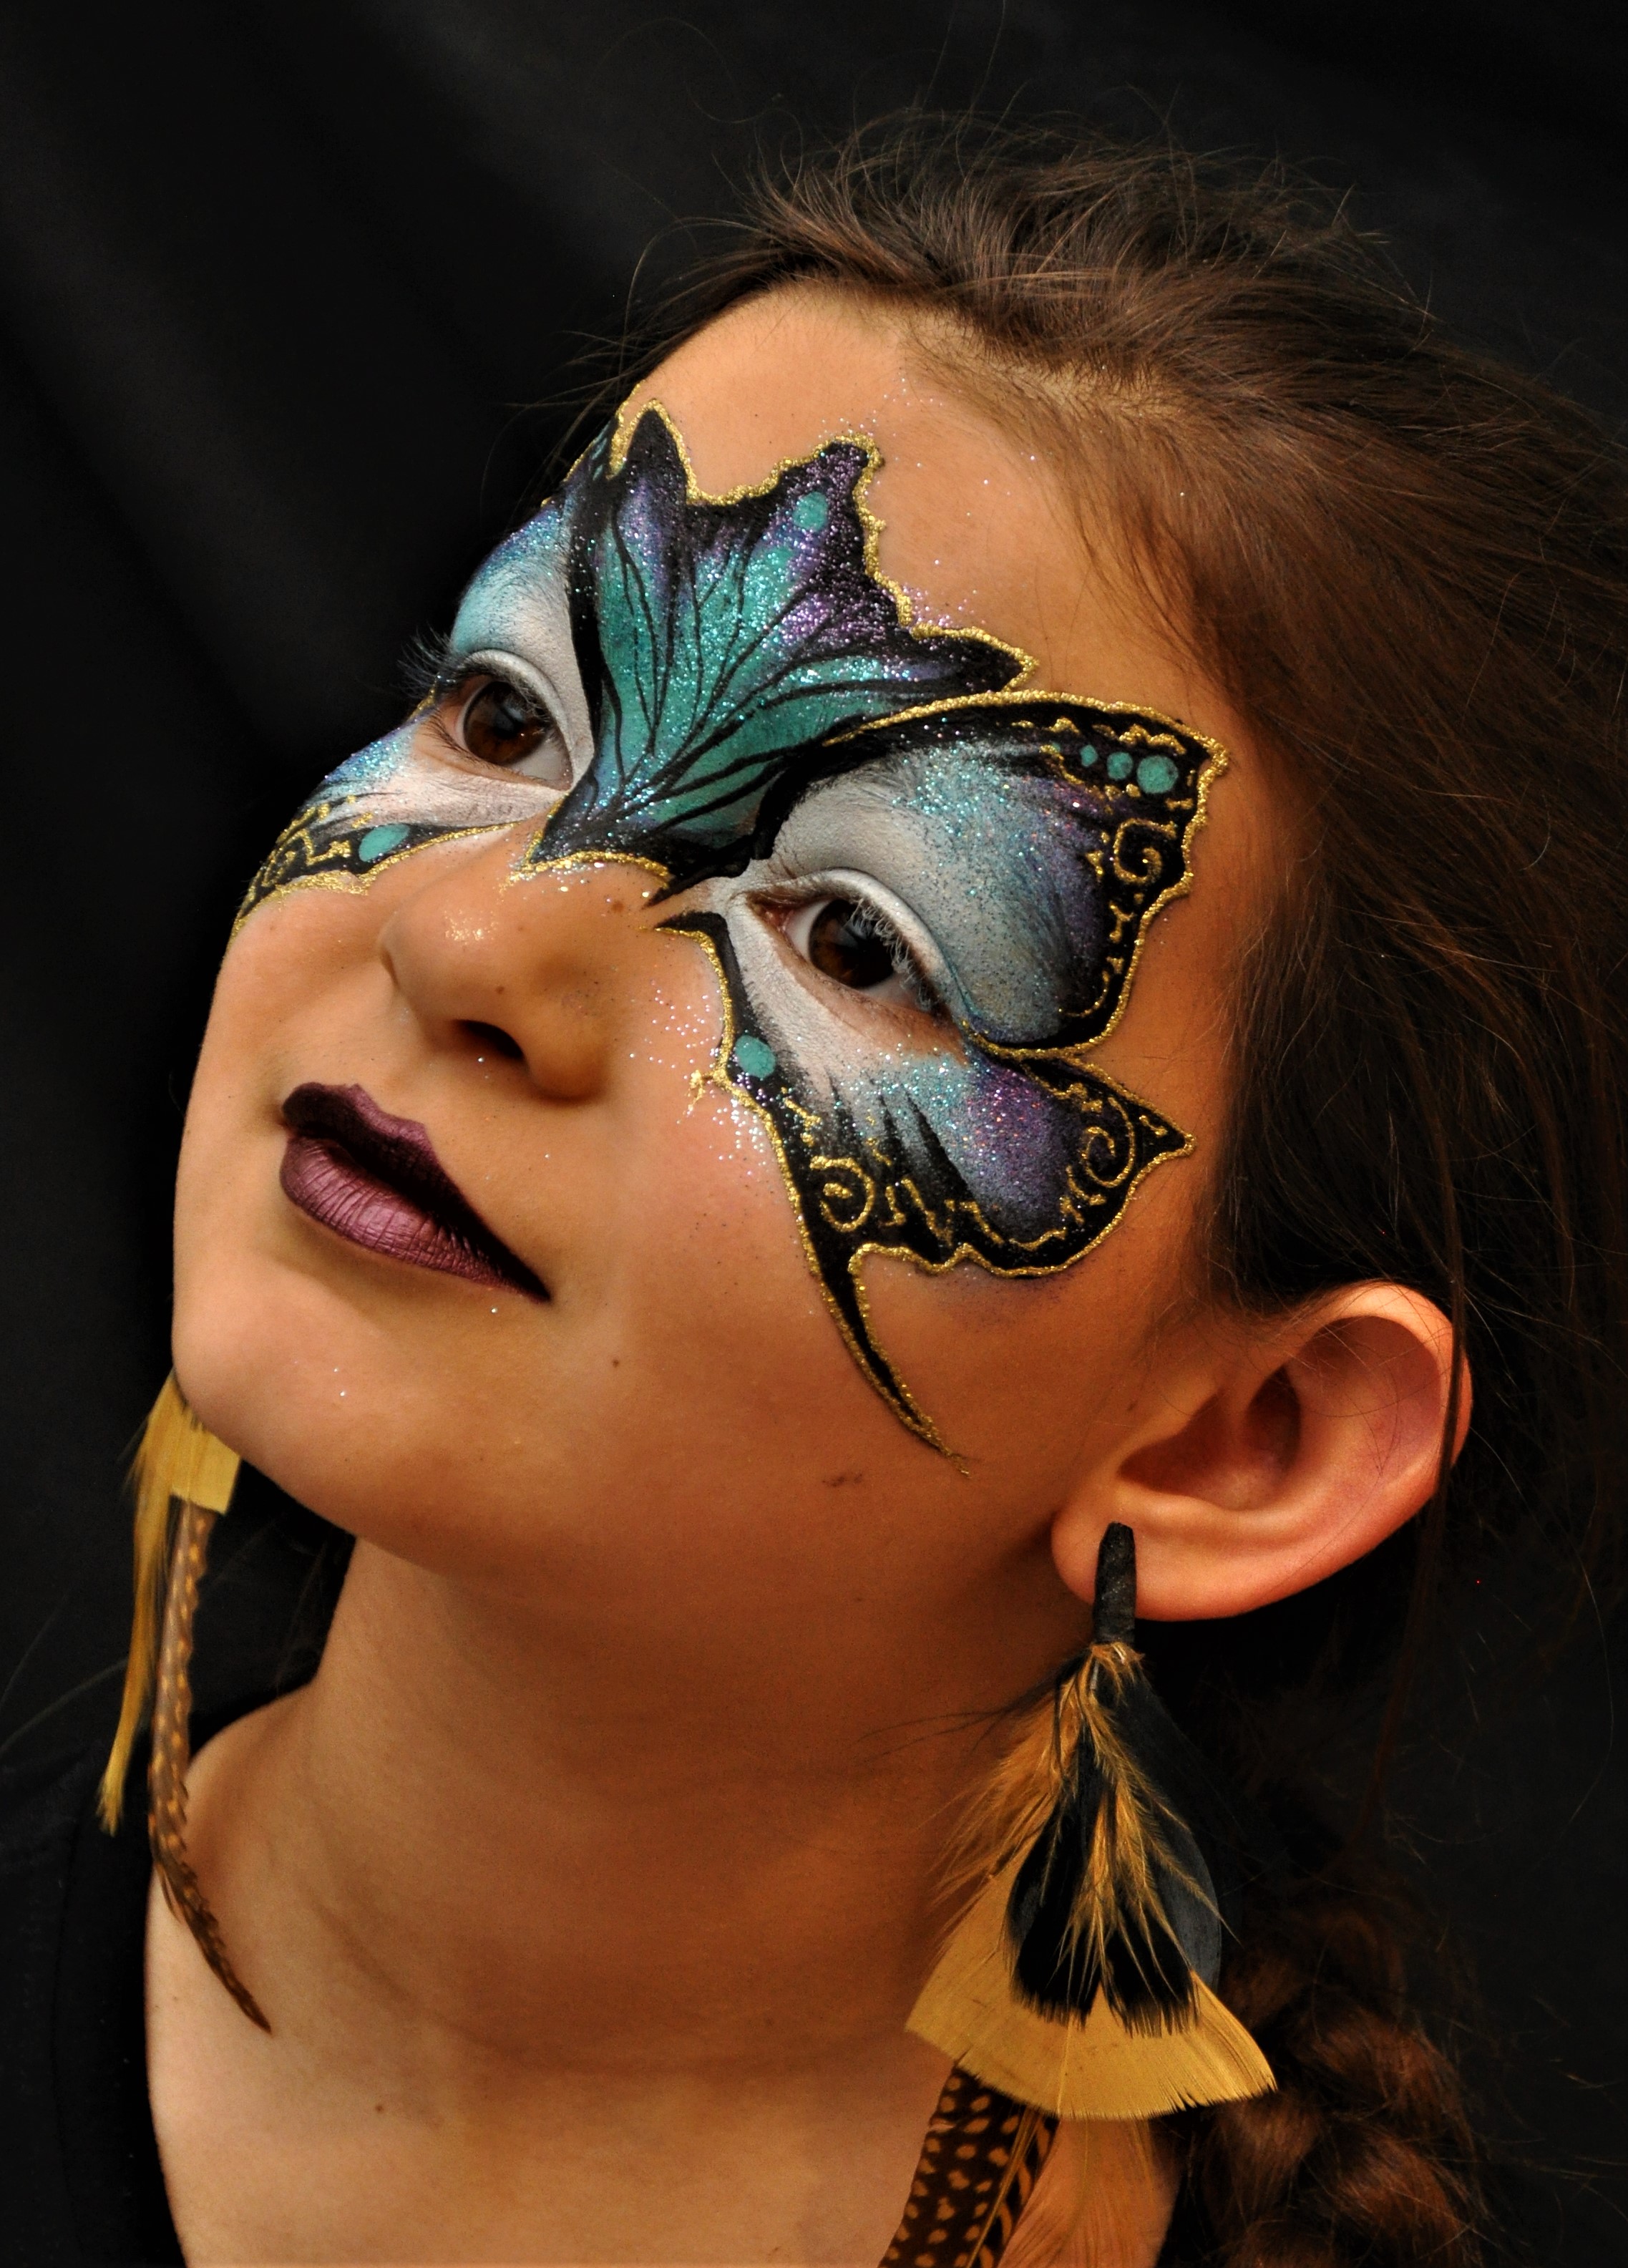 Youg girl with face painting of a mask around her eyes in blue black and gold that resembles a butterflies wings